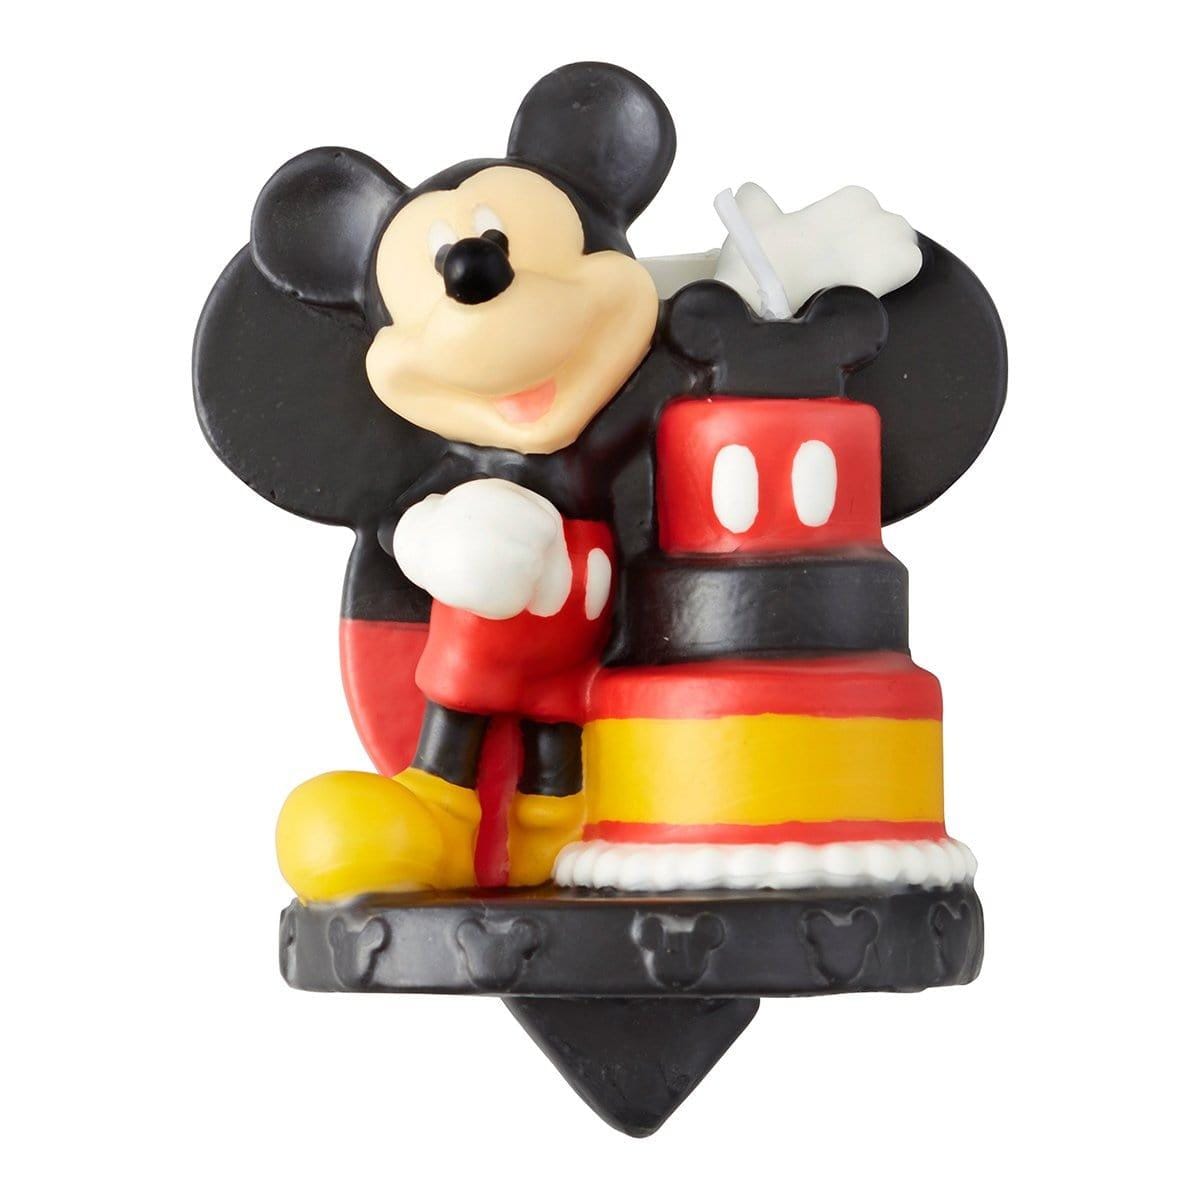 Buy Kids Birthday Mickey Mouse with cake candle sold at Party Expert